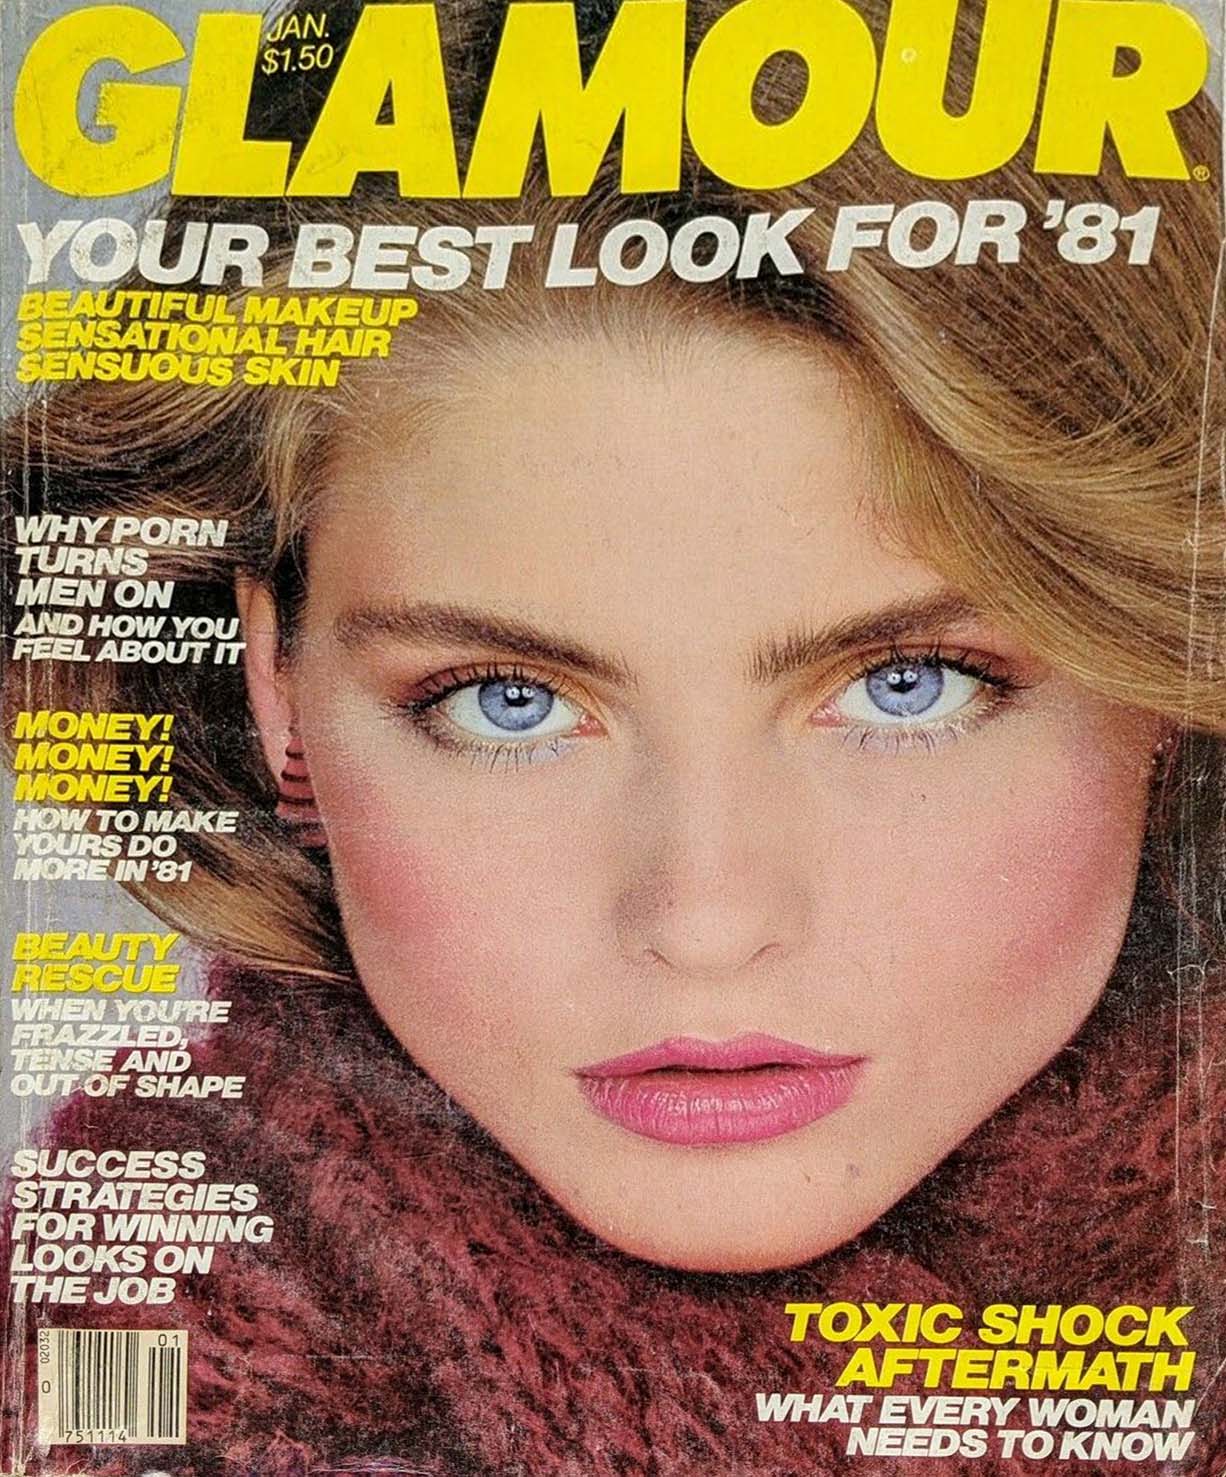 Glamour January 1981 magazine back issue Glamour magizine back copy Glamour January 1981 Womens Magazine Back Issue Published by Conde Nast Publications. Your Best Look For 81' Beautiful Makeup Sensational Hair Sensuous Skin.